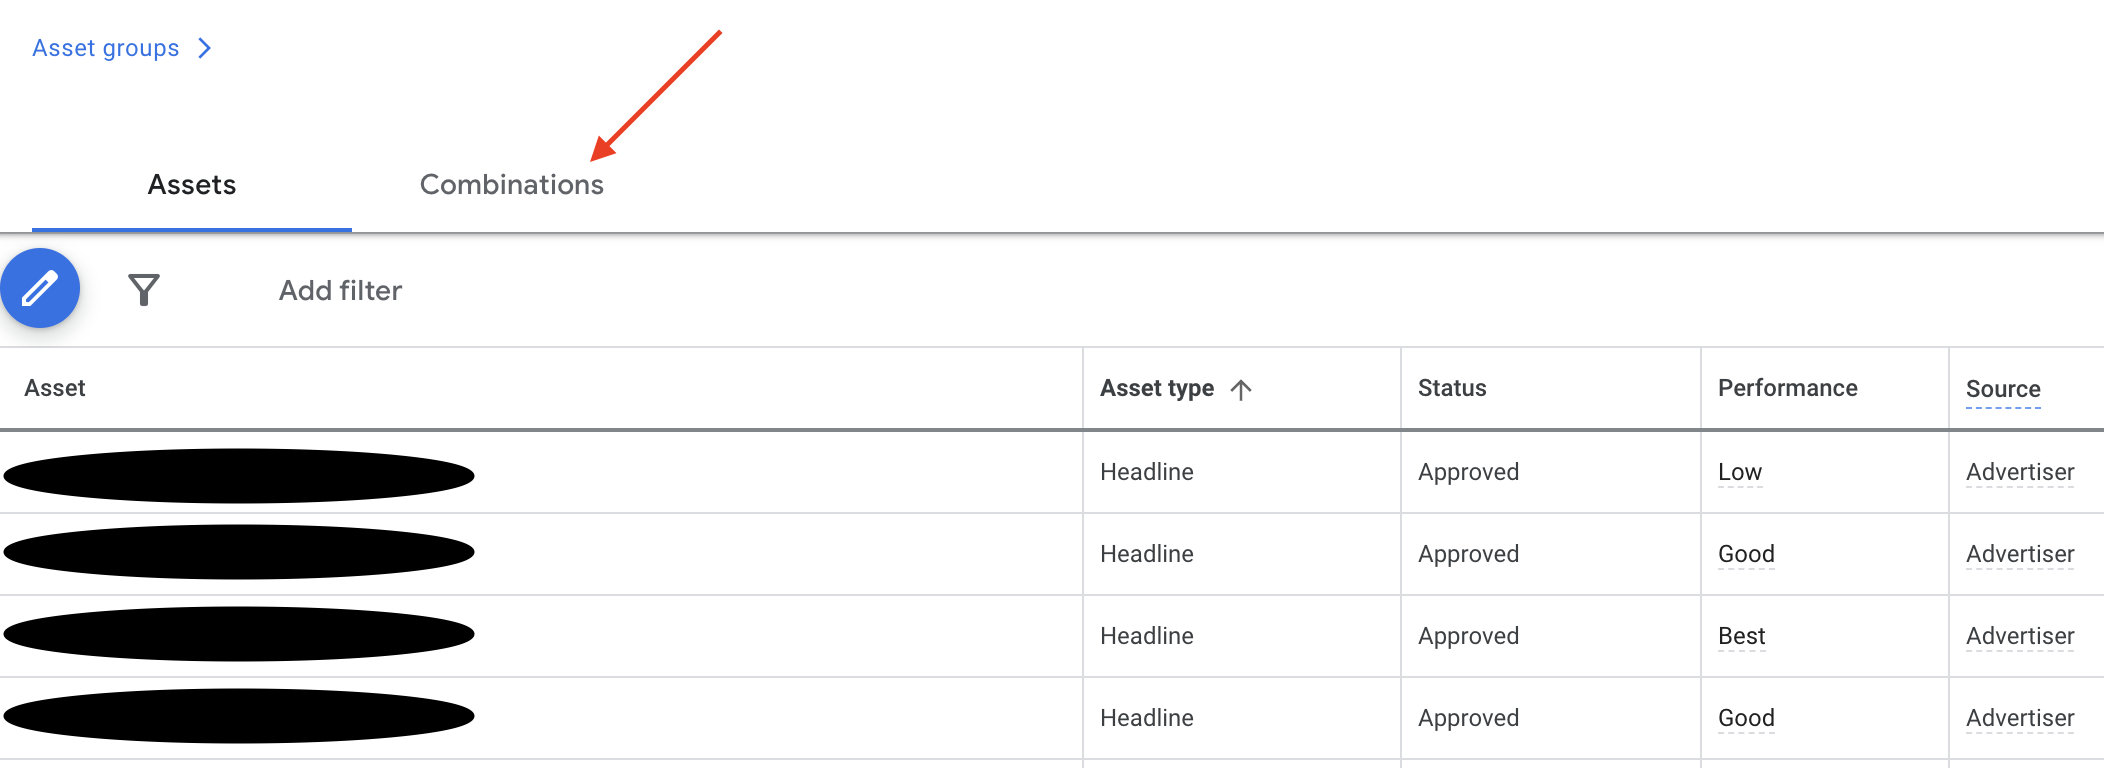 Screen shot of Asset Combination report in Google Performance Max interface